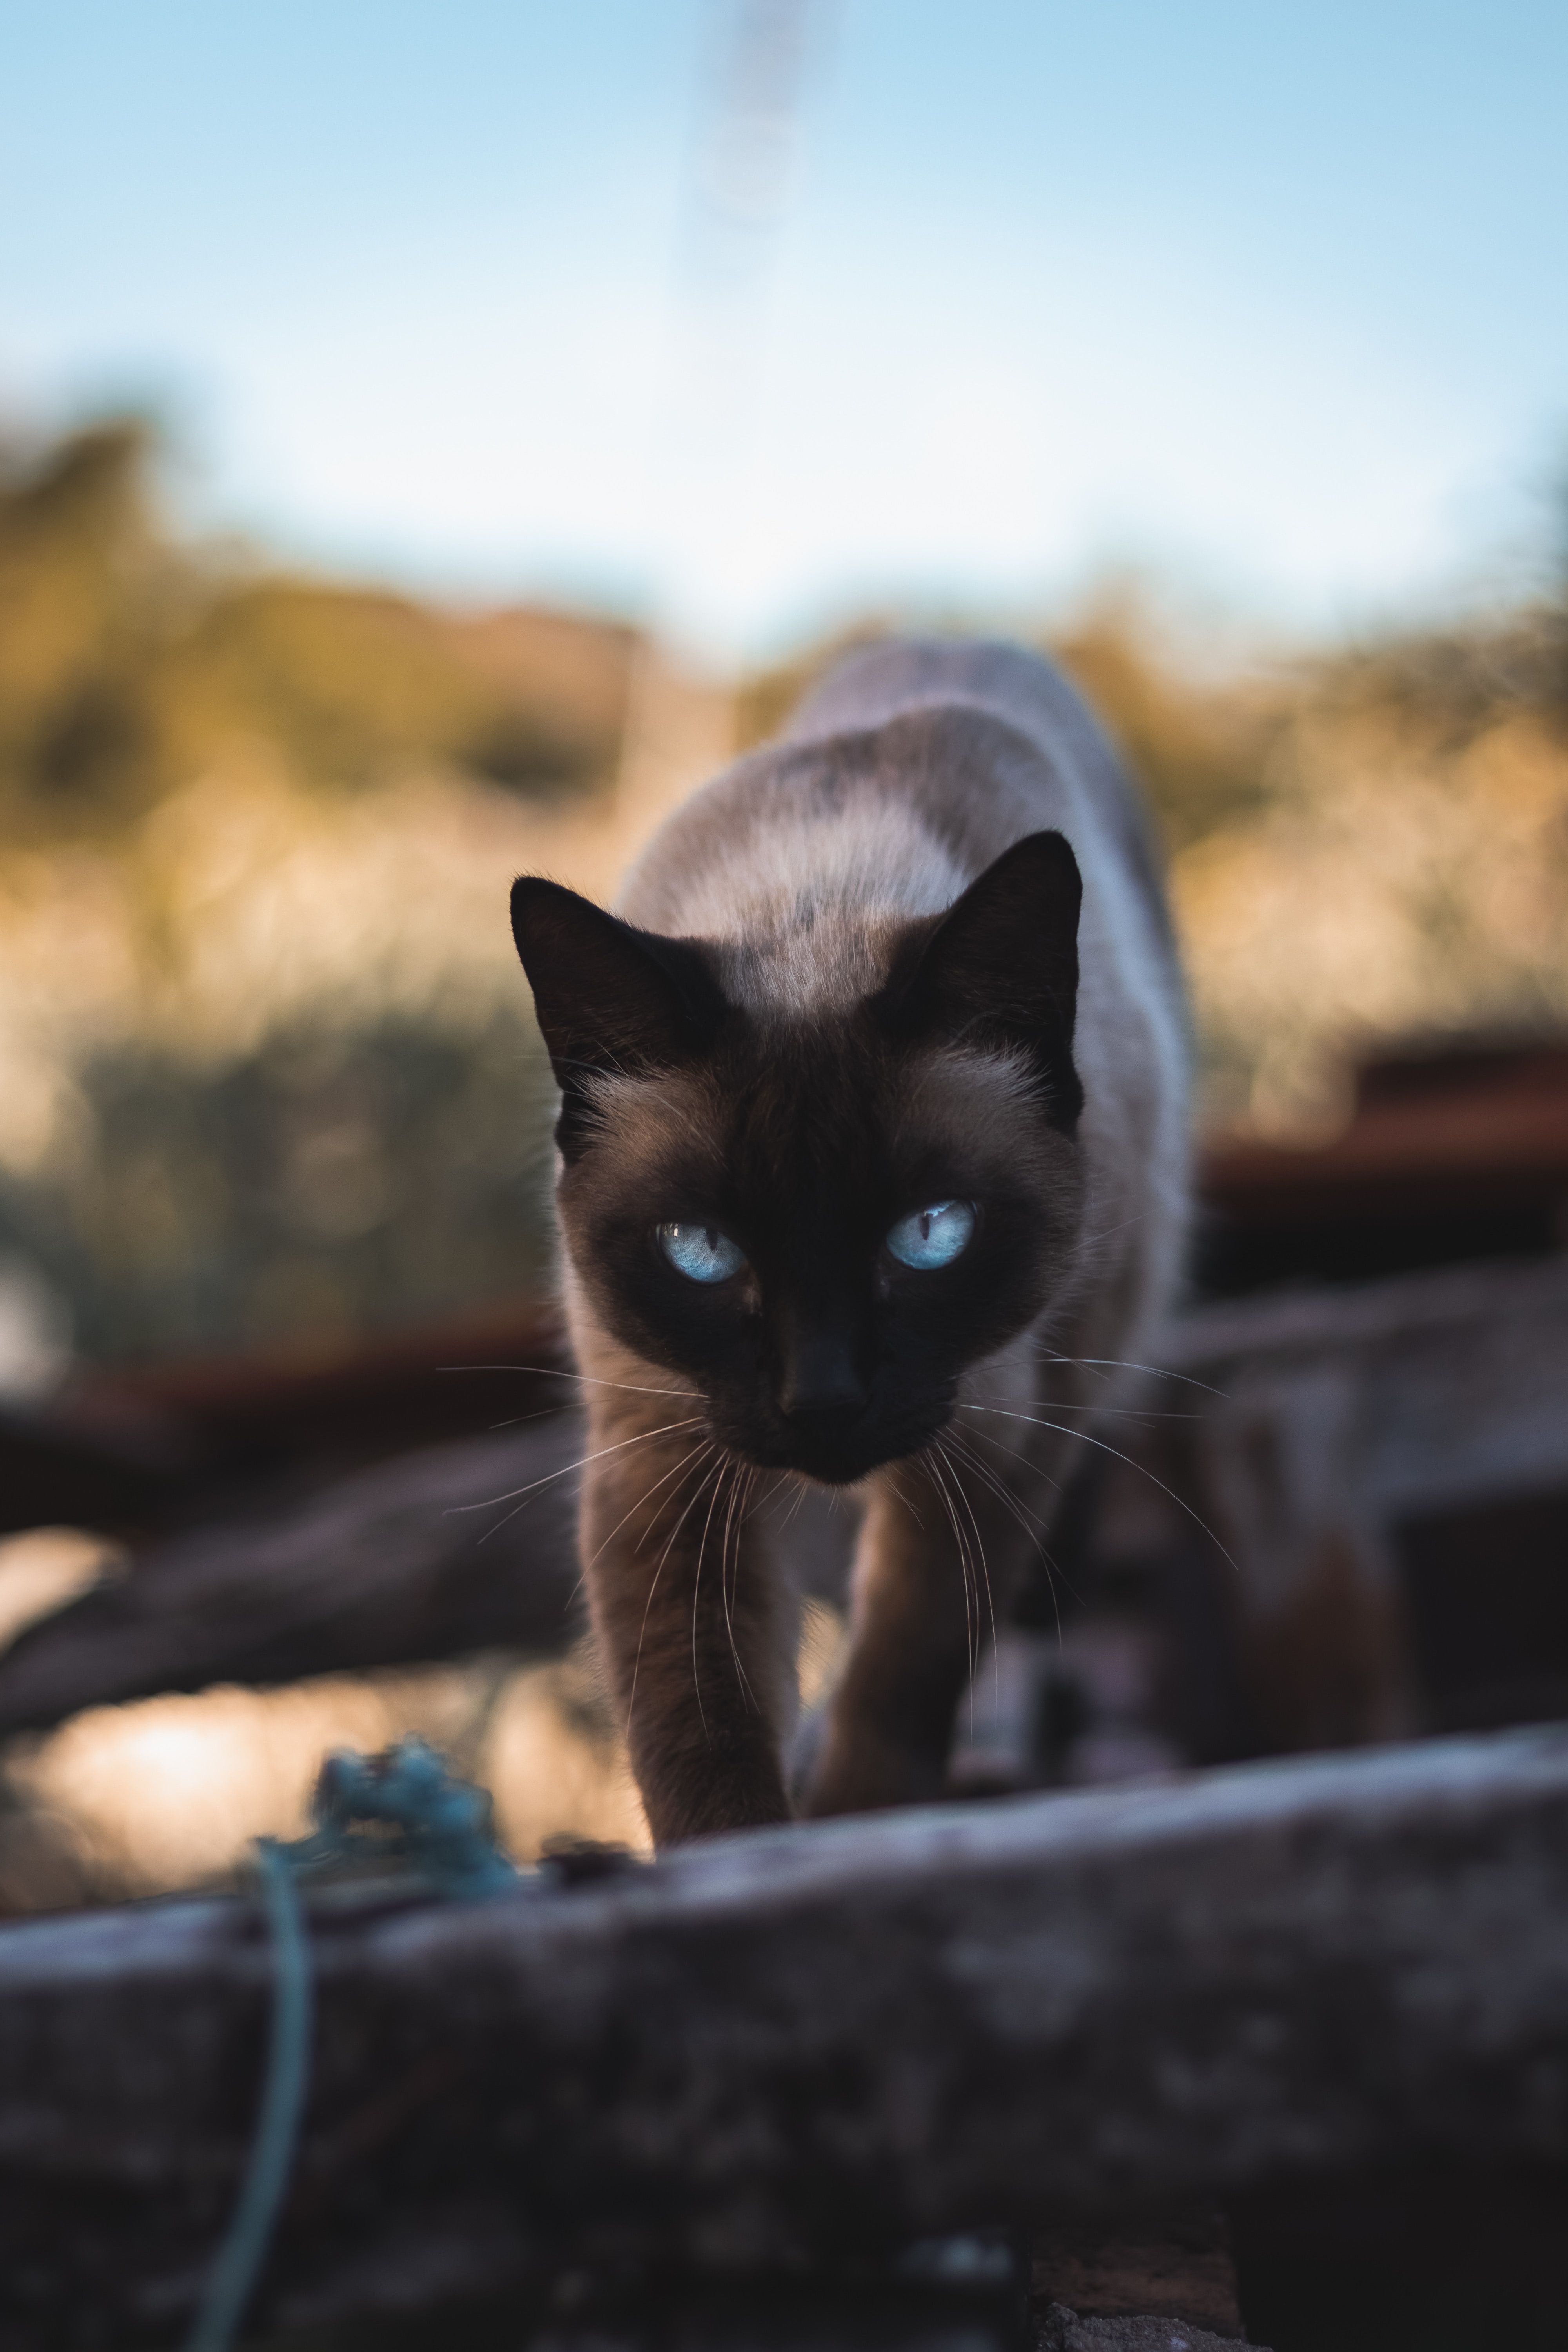 125931 download wallpaper animals, cat, pet, sight, opinion, animal, siamese screensavers and pictures for free